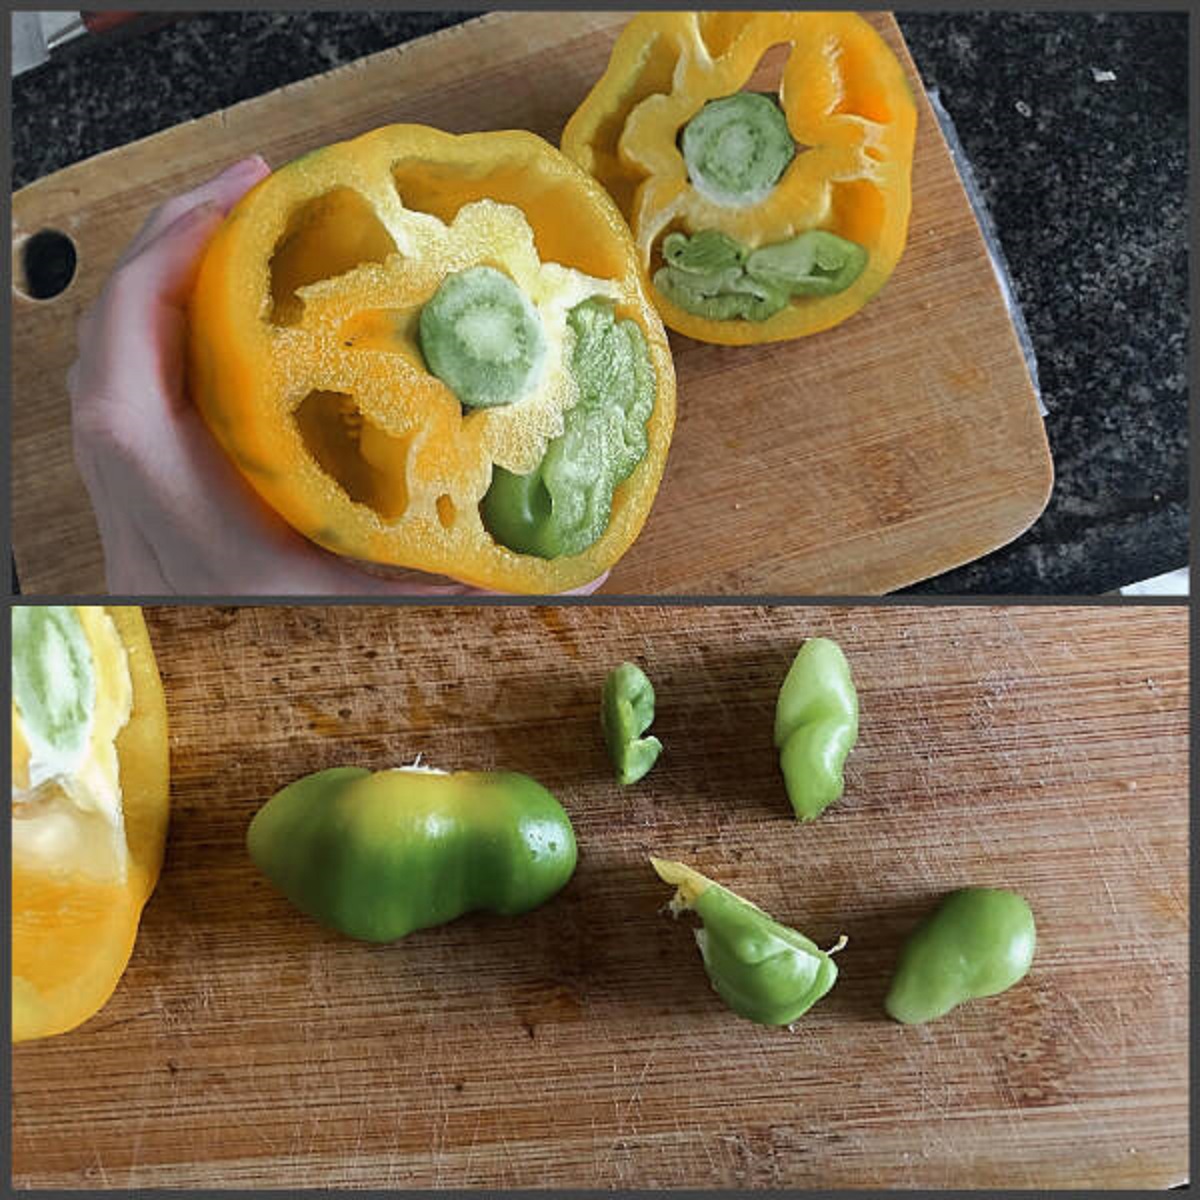 “My yellow pepper came with a green pepper inside.”